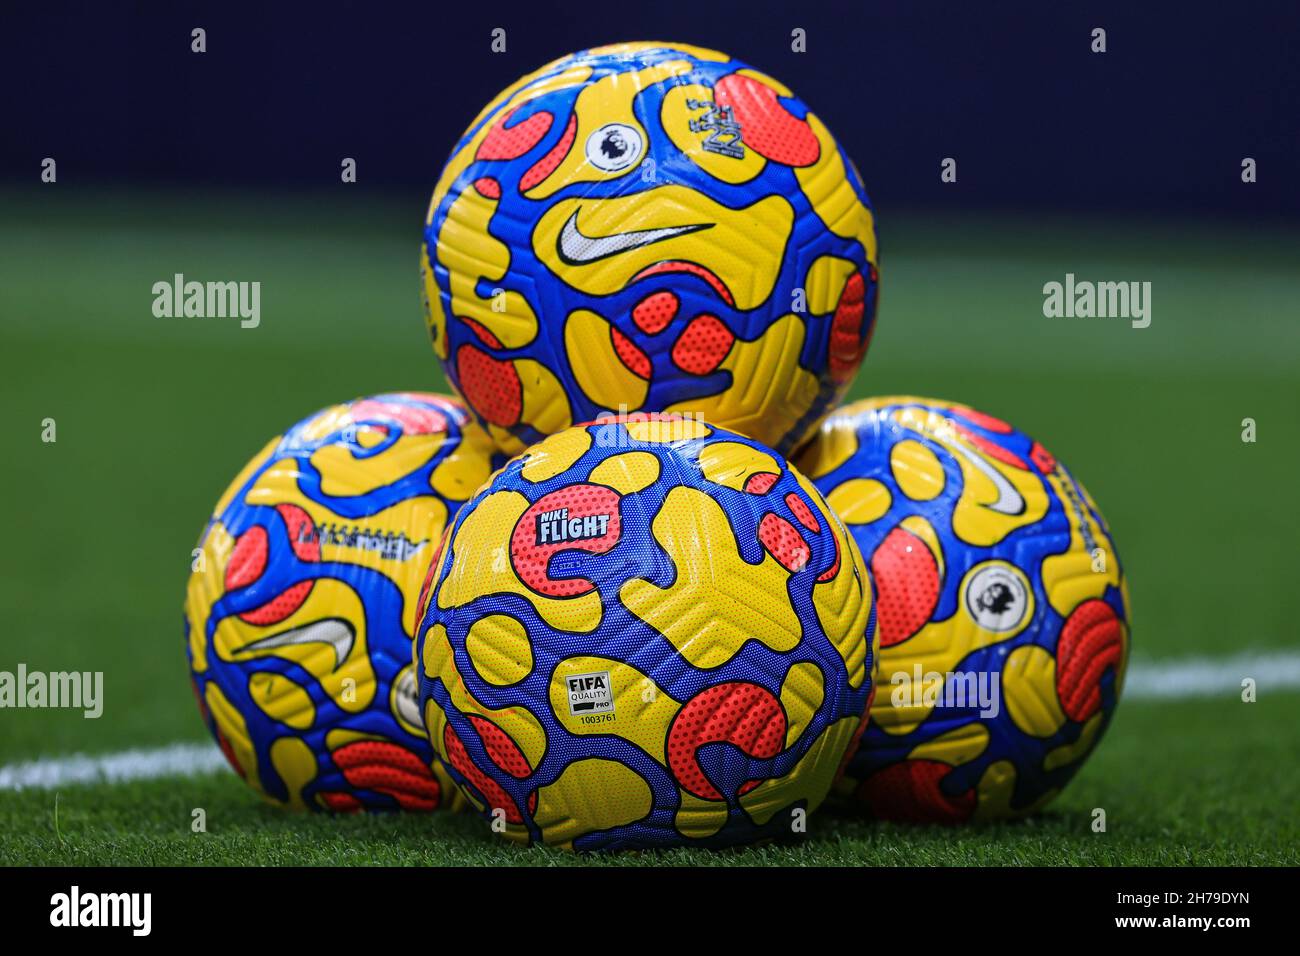 A stack of Nike Flight Premier league branded balls Stock Photo